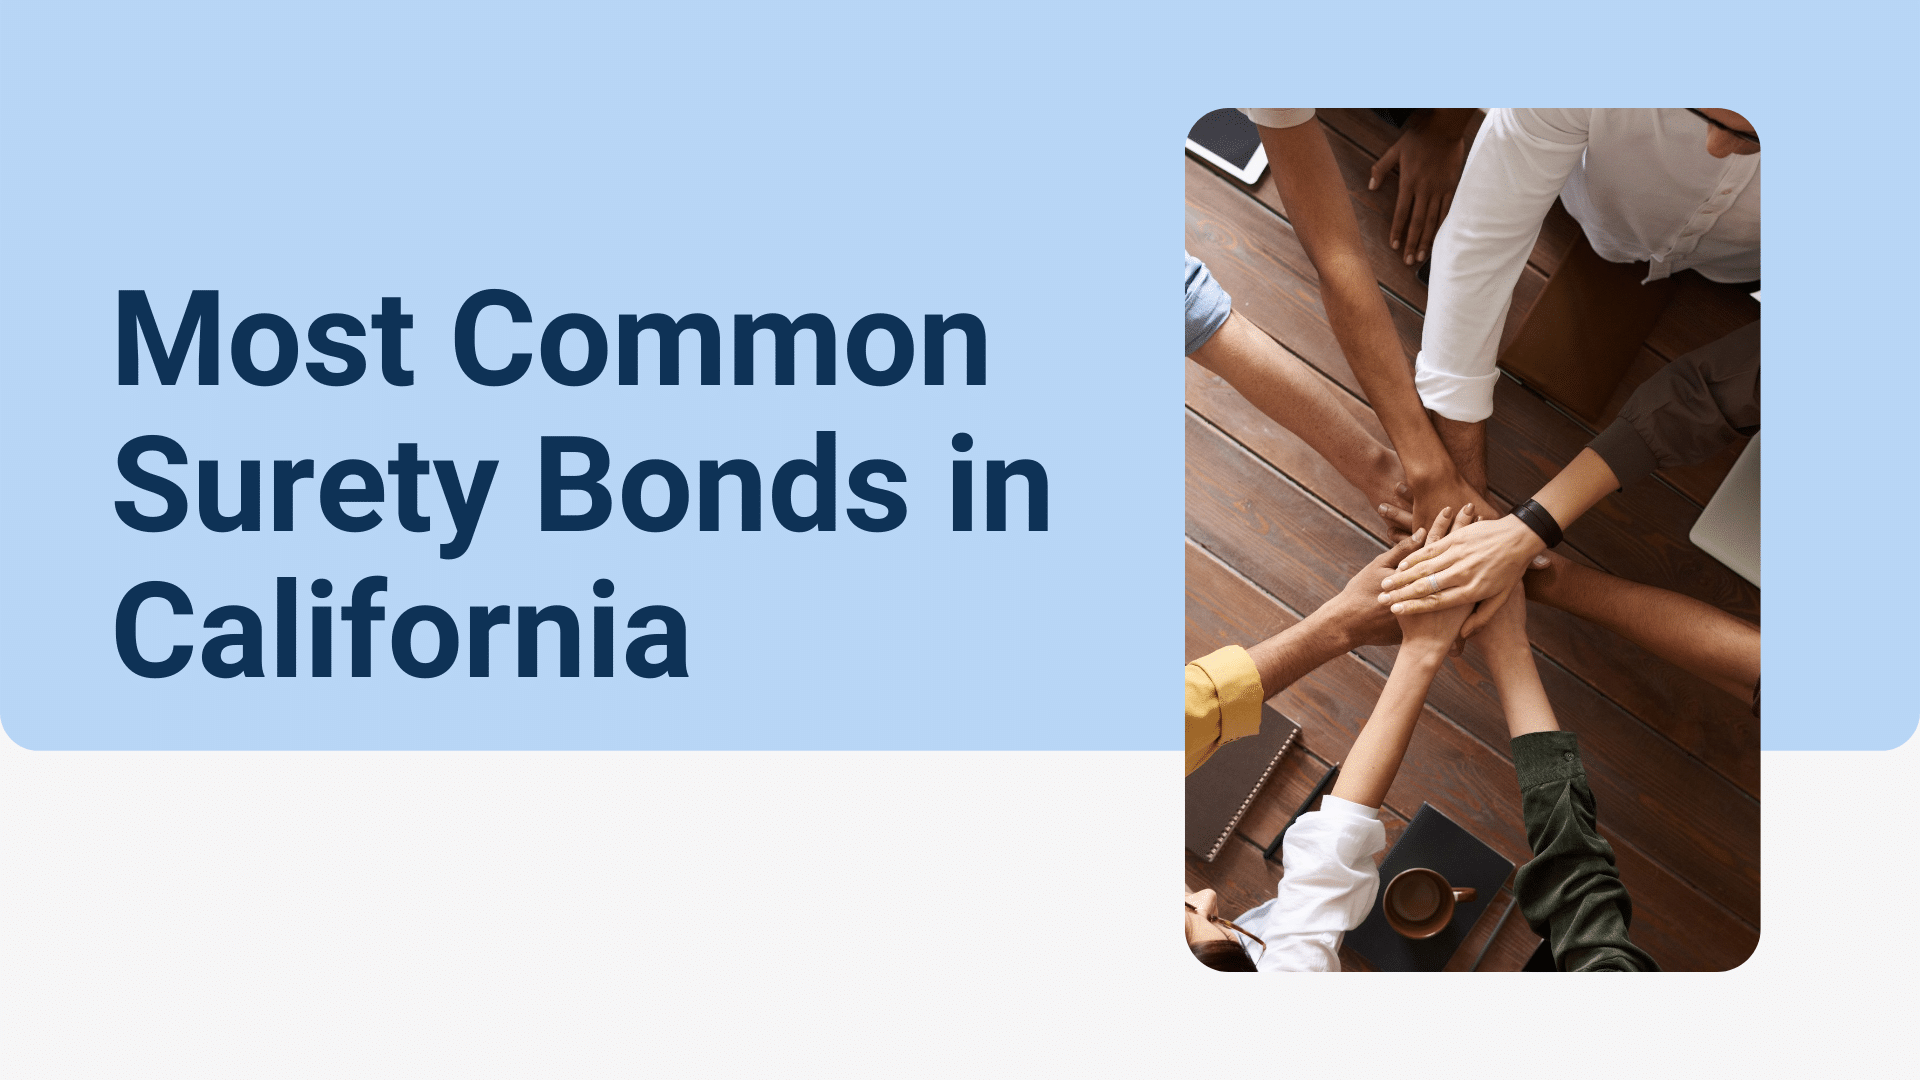 surety bonds - What is the cost of a surety bond in California - hands joined together